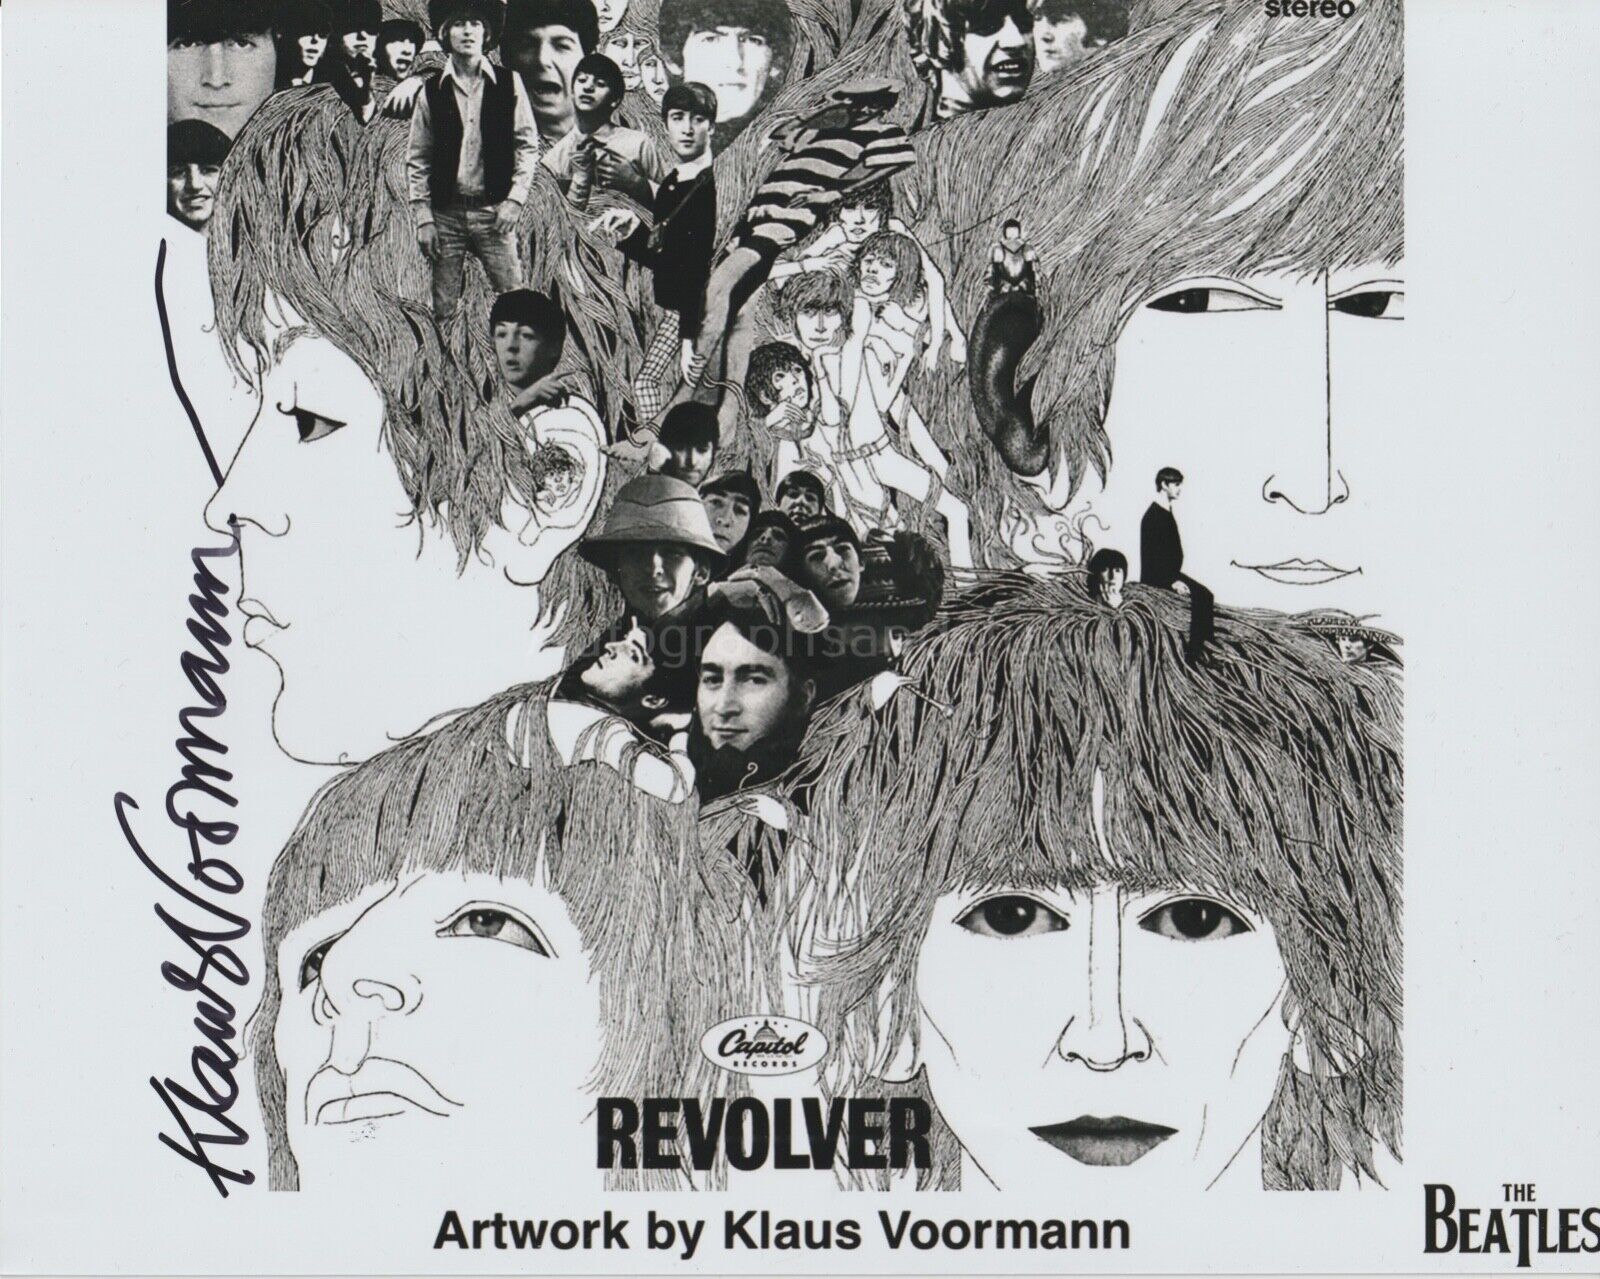 Klaus Voormann Hand Signed 8x10 Photo Autograph The Beatles Revolver, Manfred